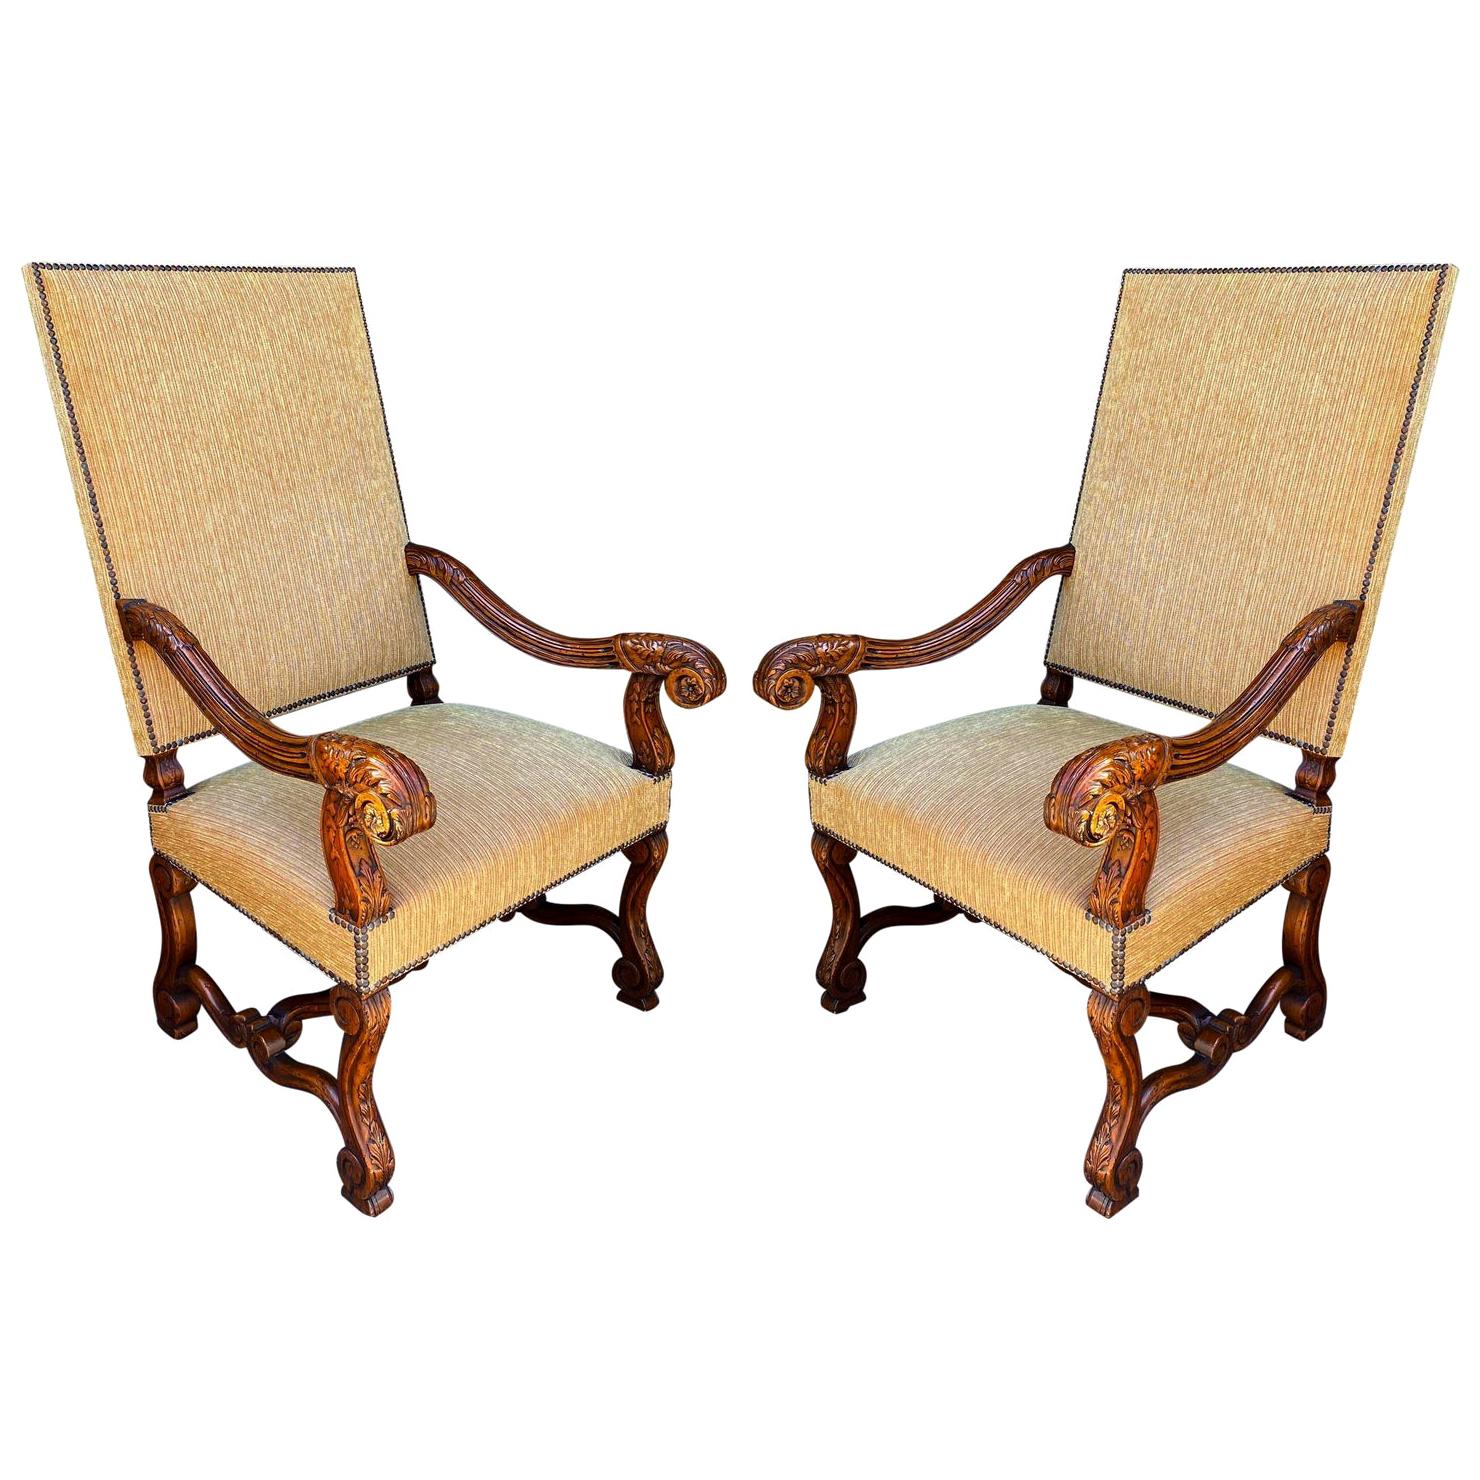 Ebanista Spanish Colonial Carved Walnut Throne Chairs, a Pair